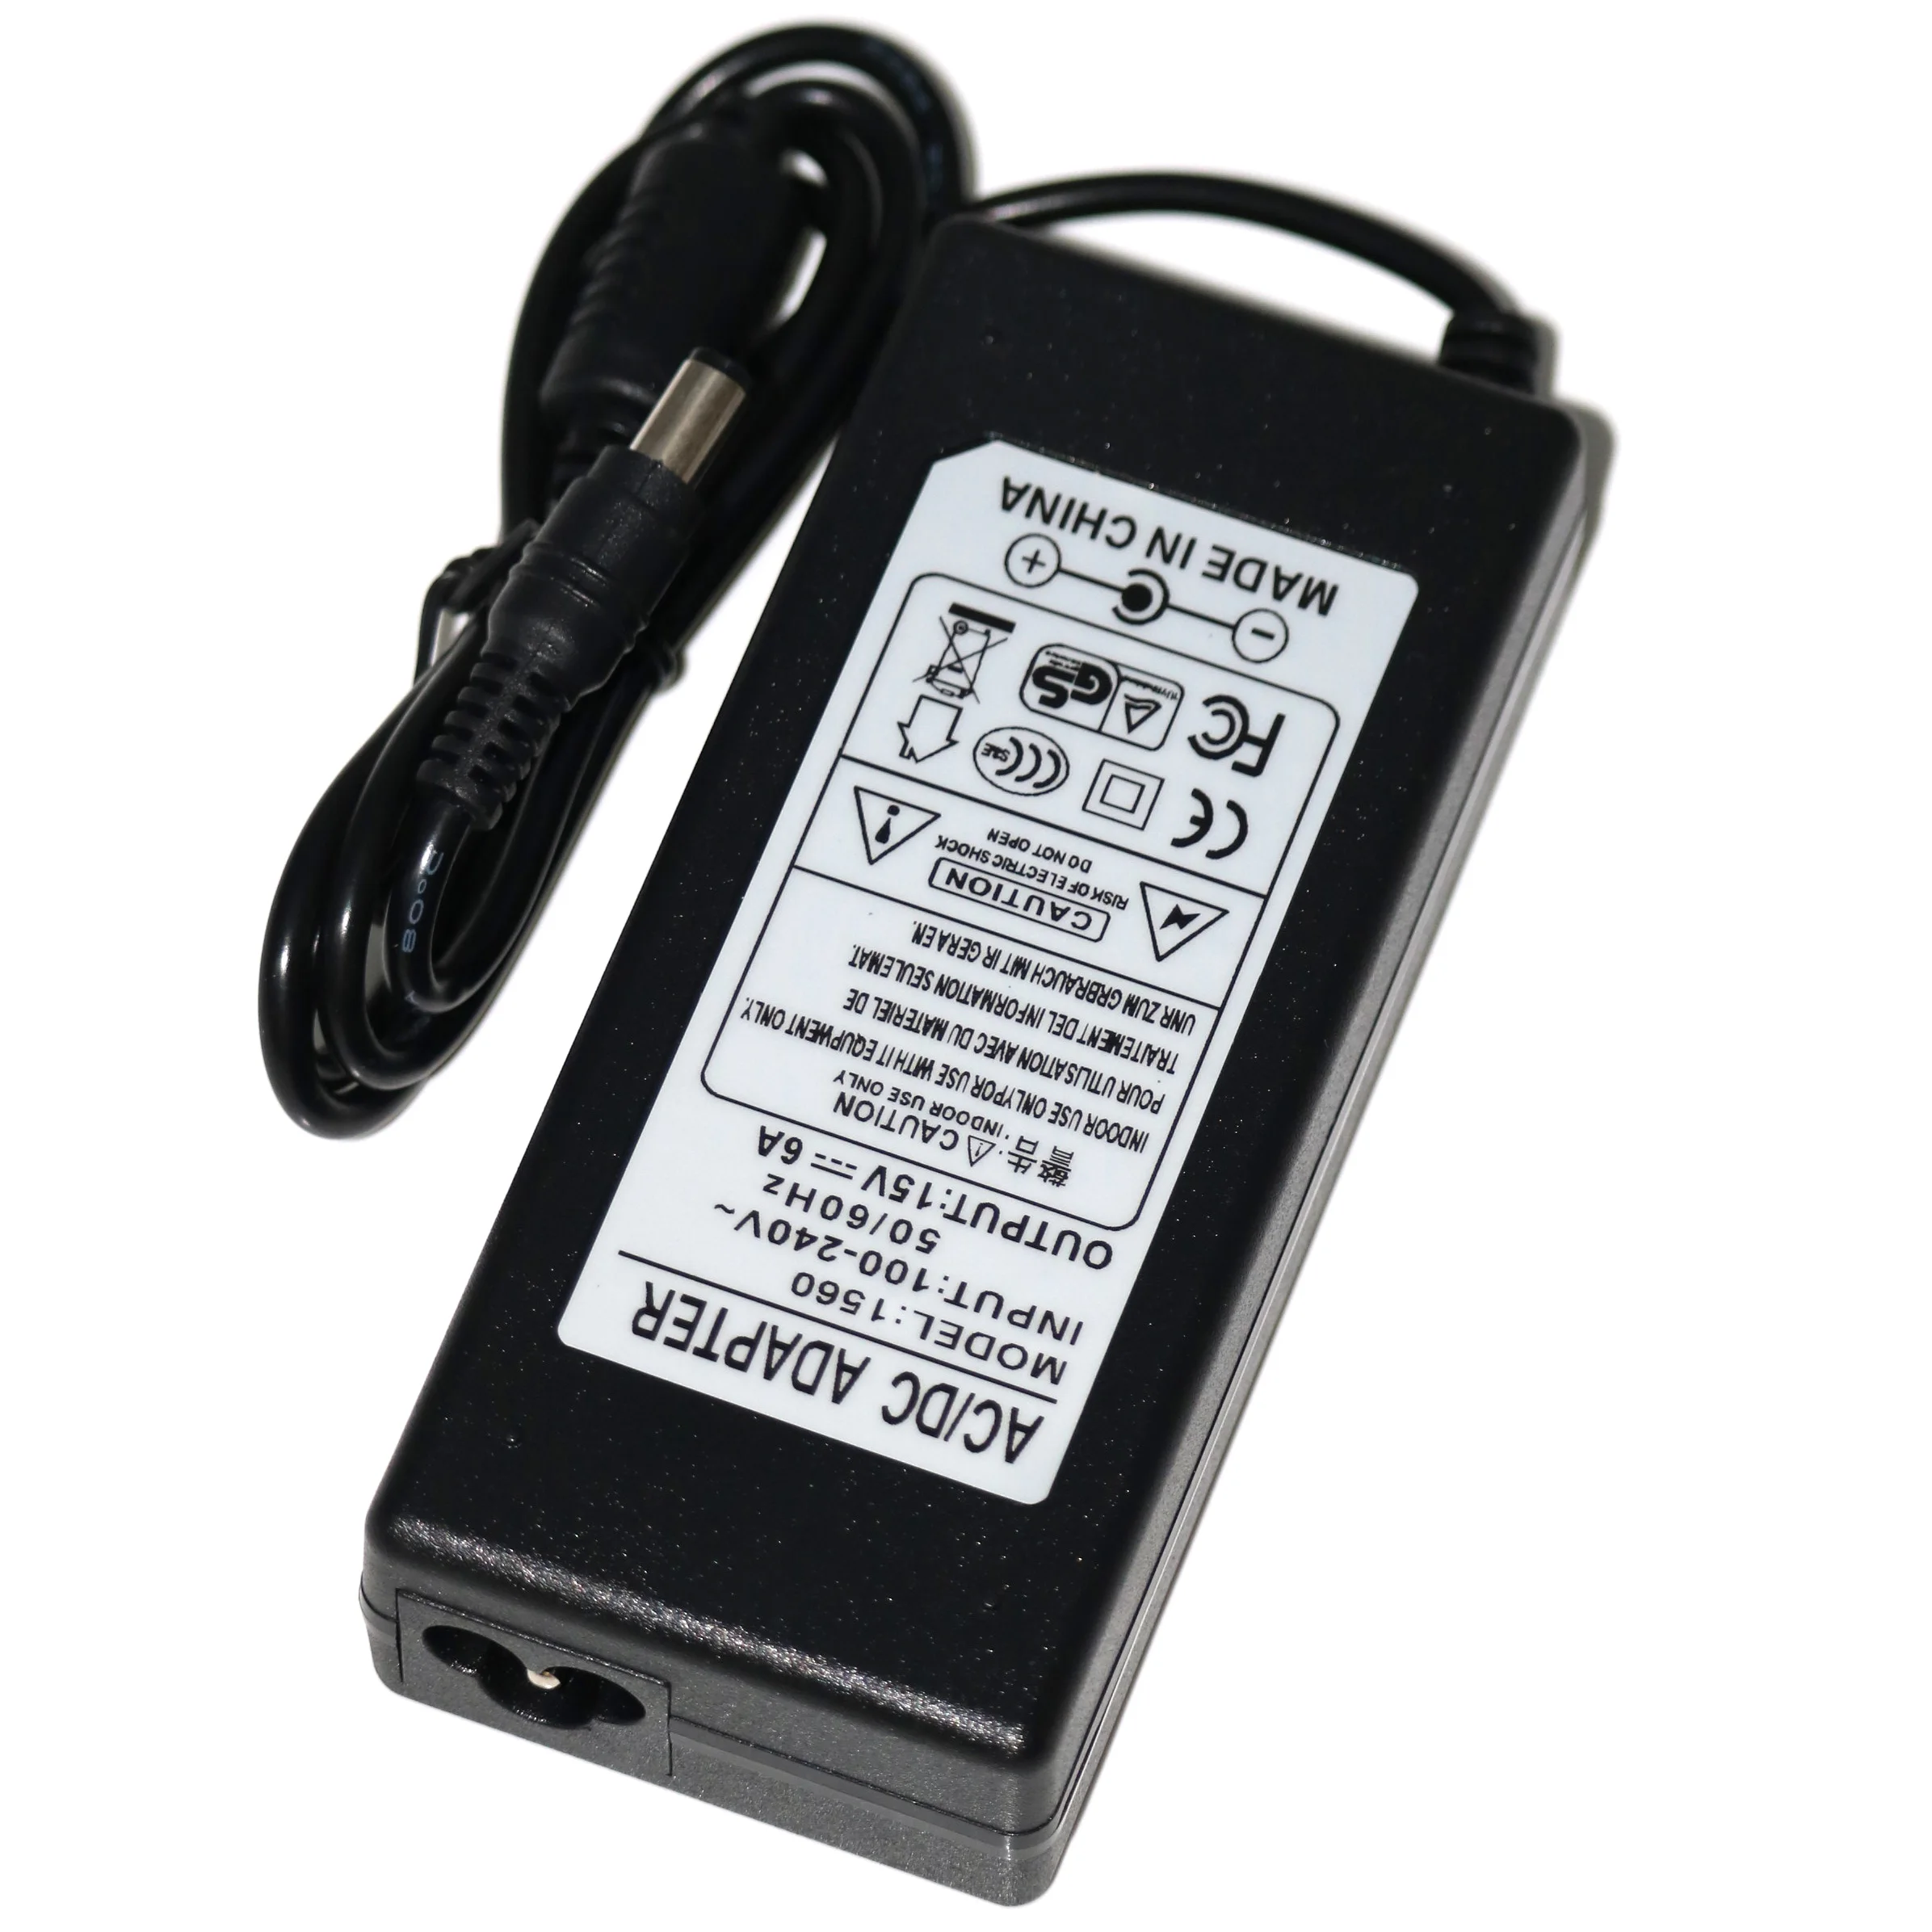 

For Toshiba Satellite A100-049 F20 F30 Laptop Charger AC Adapter 15V 6A 90W 6.3 x 3.0mm Mains Battery Power Supply Unit